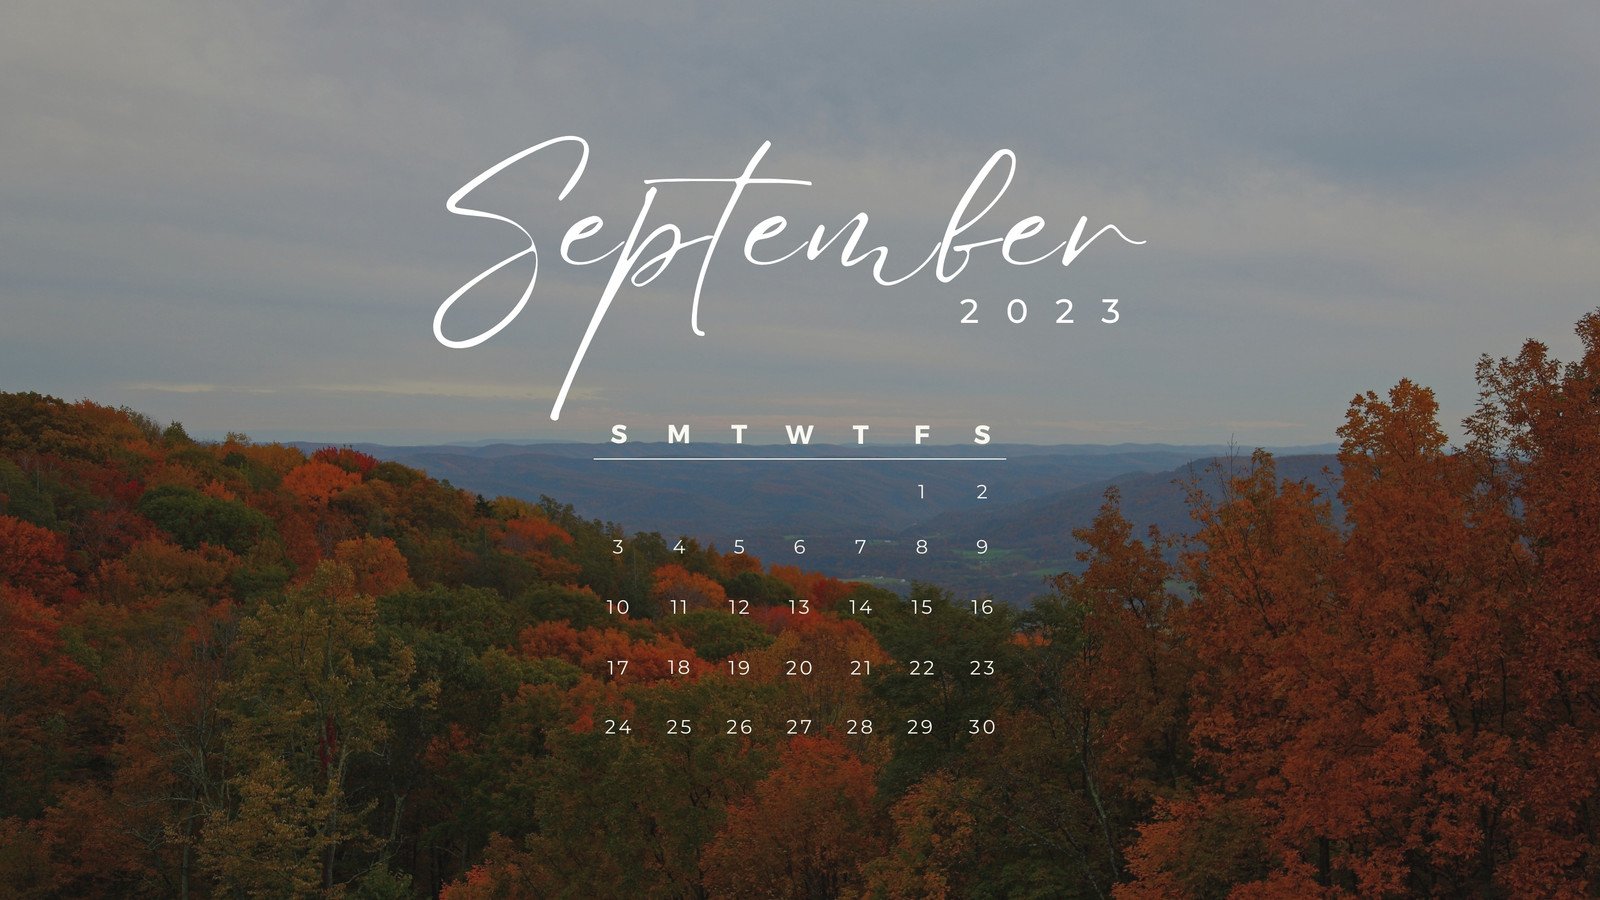 Free Downloadable Tech Backgrounds for September 2020  The Everygirl